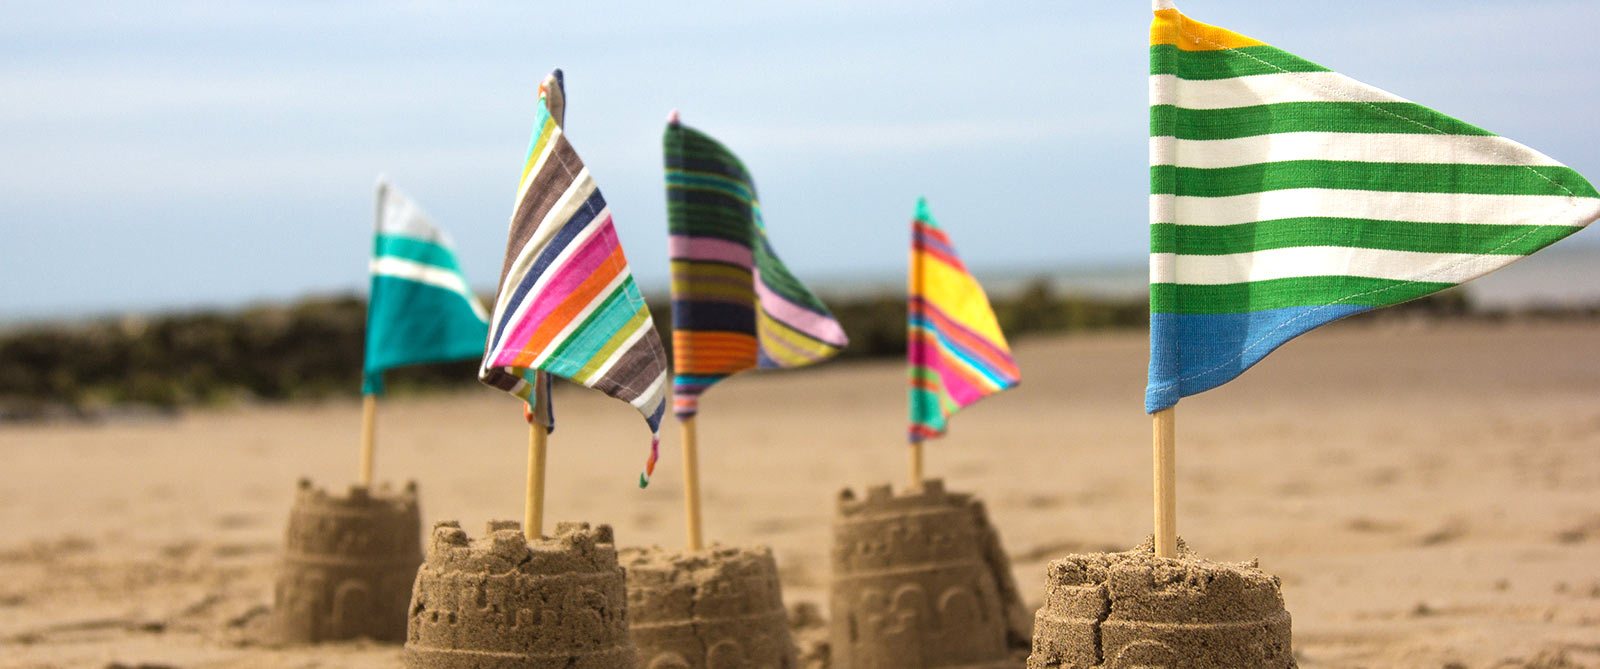 Sandcastle Flags | Striped Flags